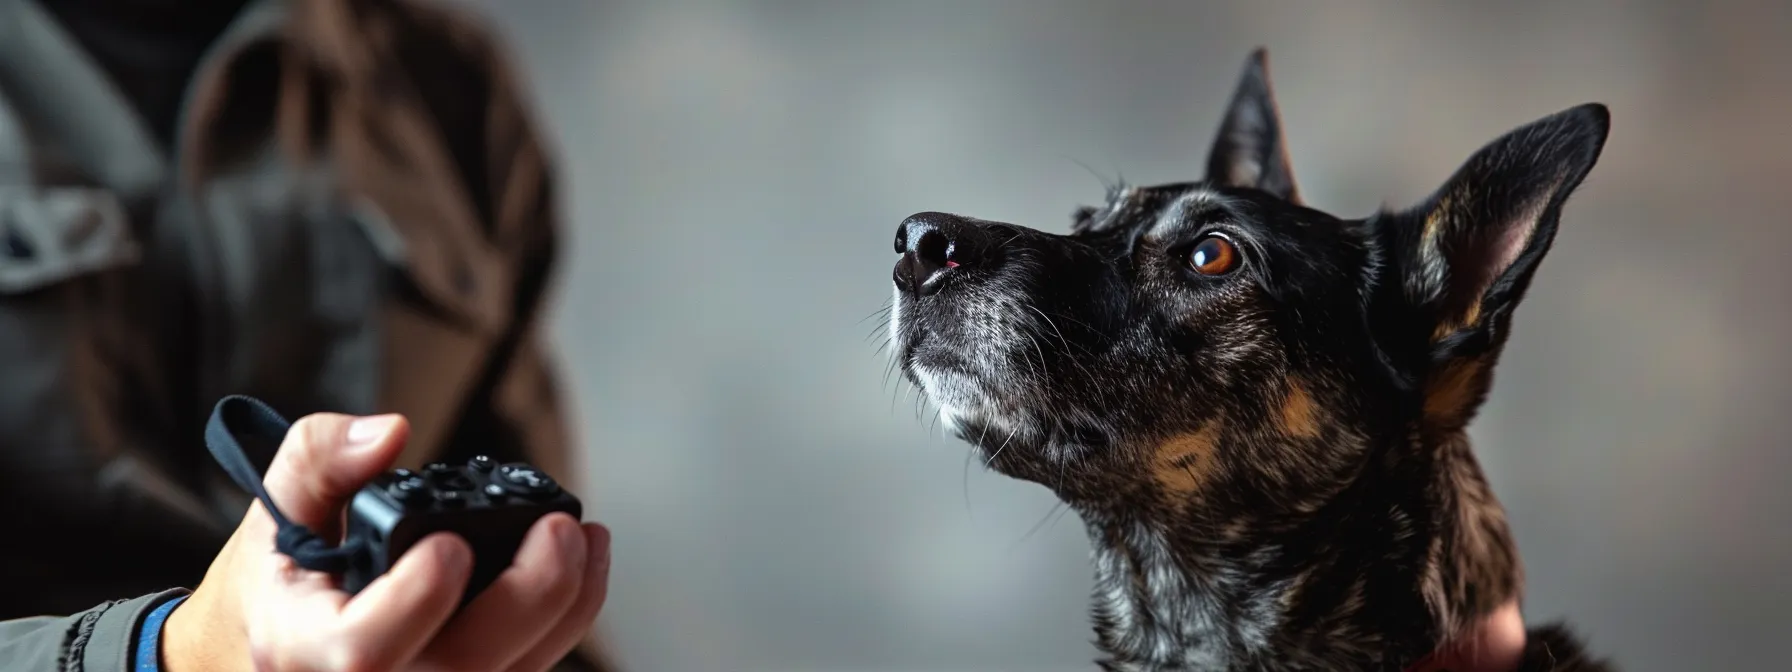 a dog trainer holding a high-tech voice command gadget, capturing a dog's attention with a distinct signal.